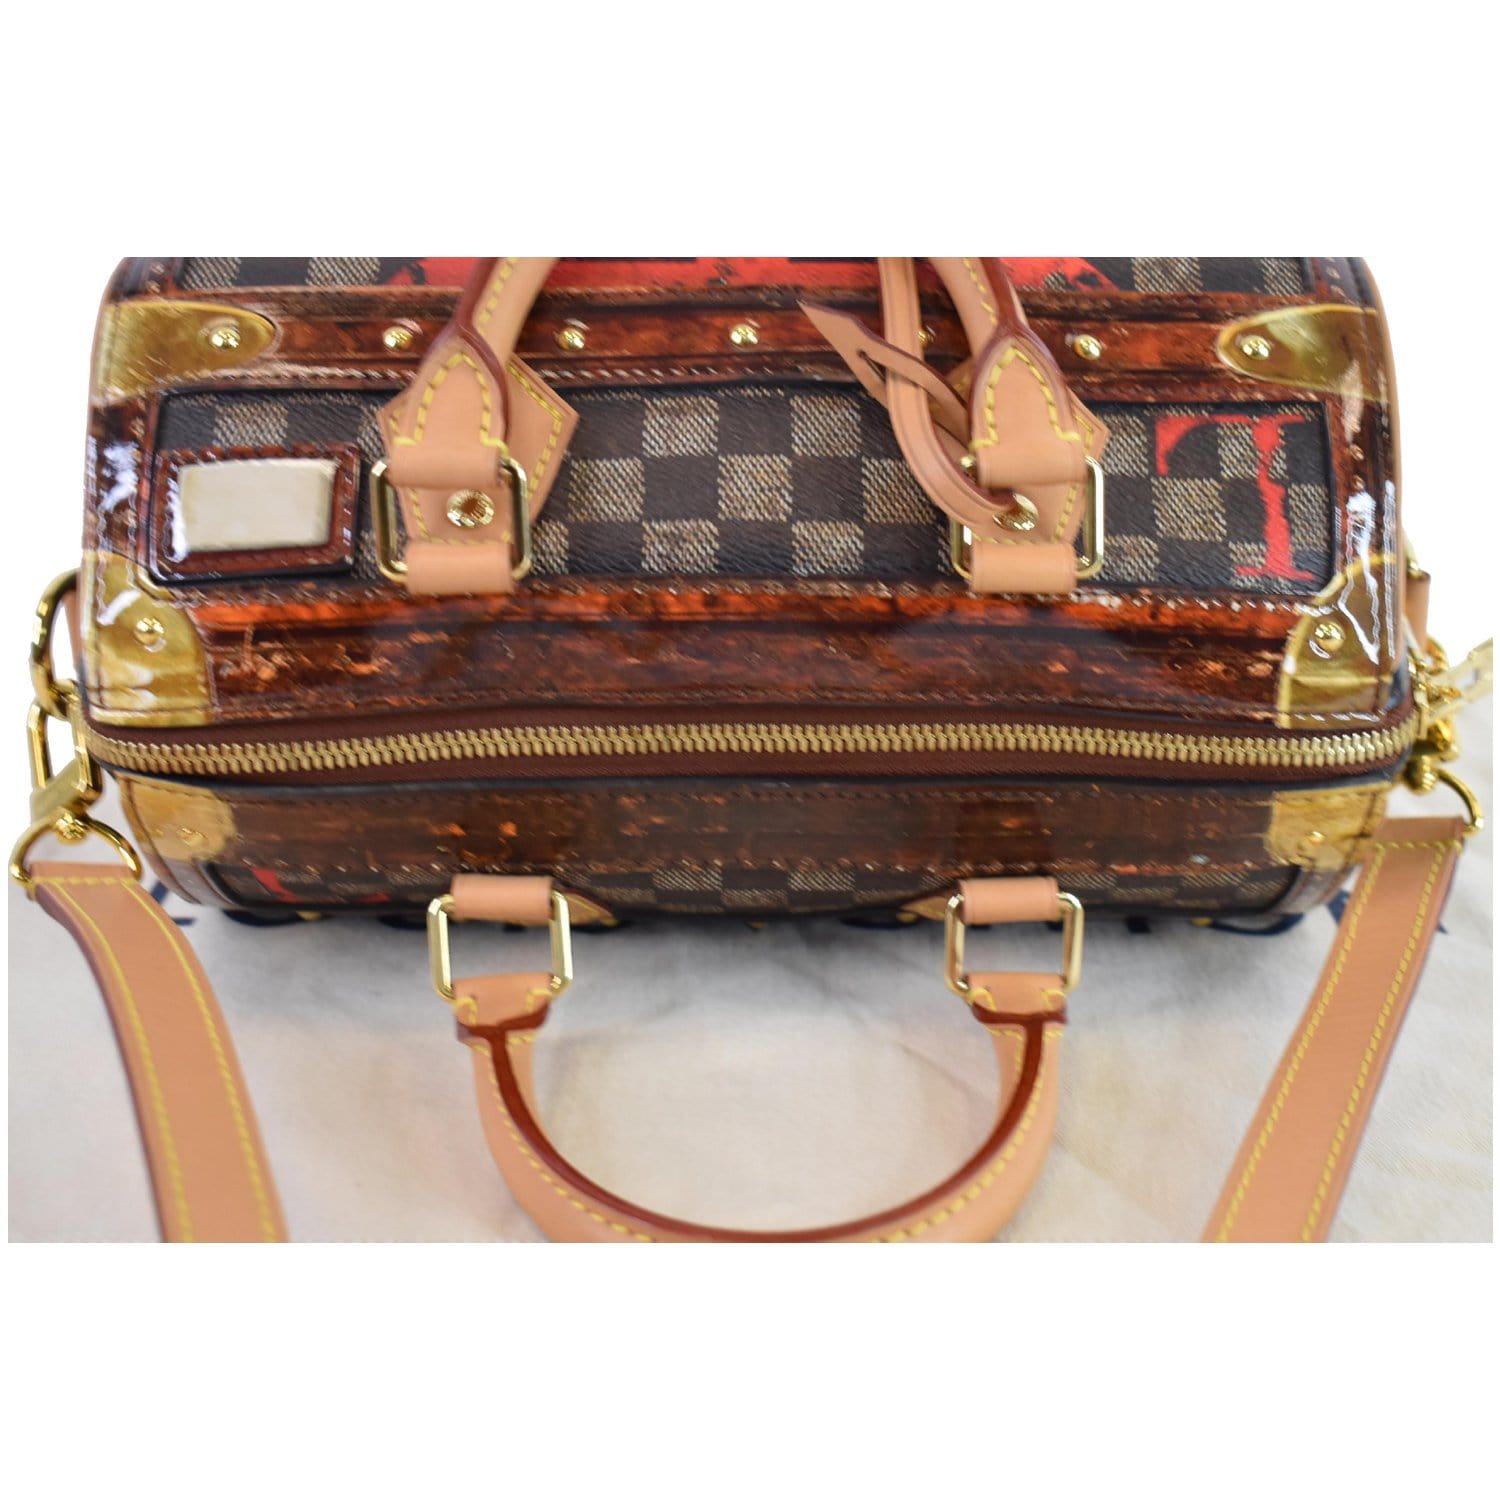 Louis Vuitton Time Trunk Bags – You and I